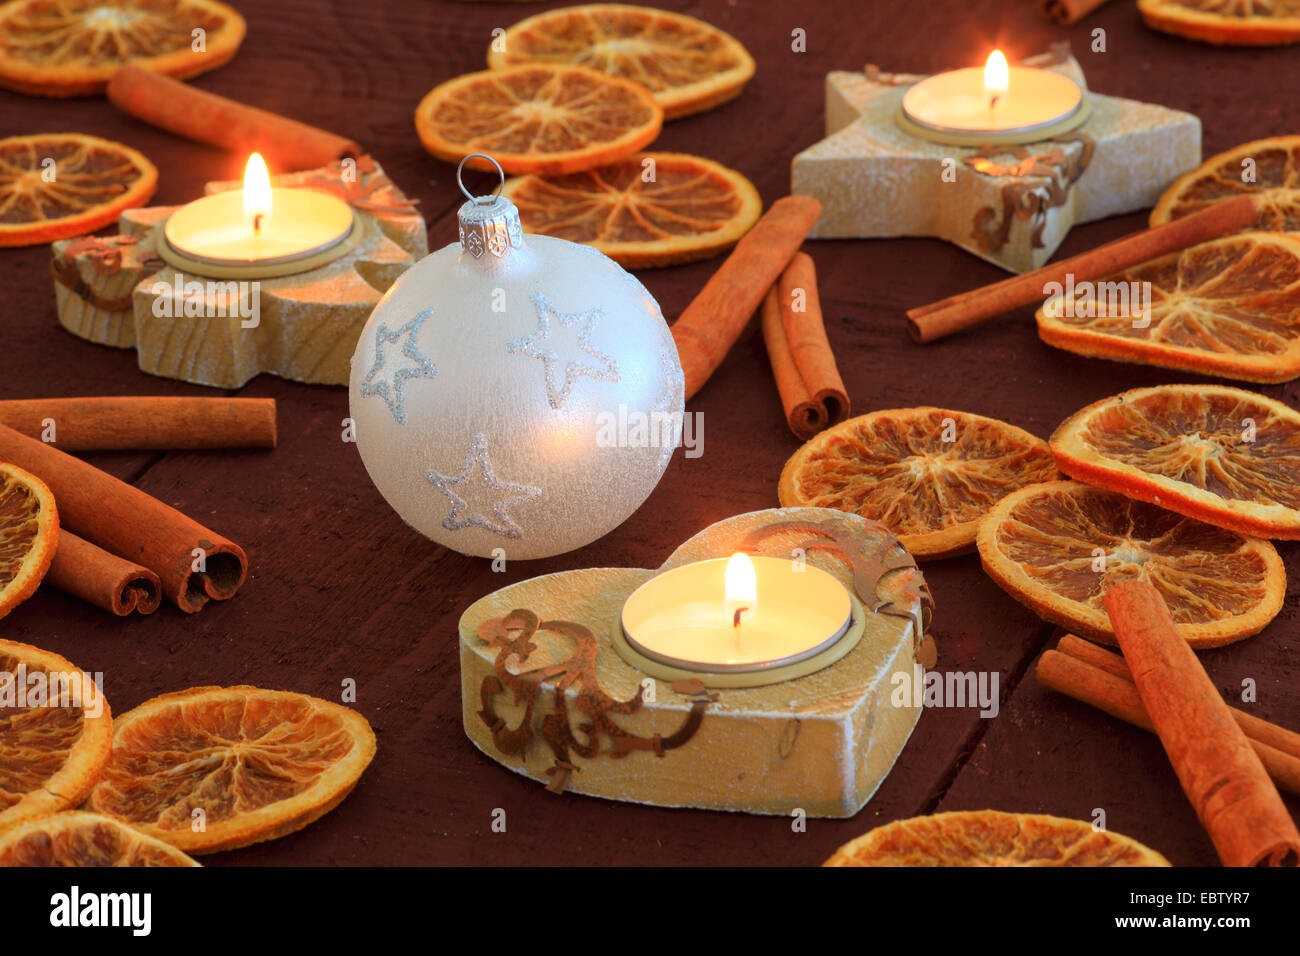 Christmas decoration with cinnamon sticks, orange disks and candles Stock Photo